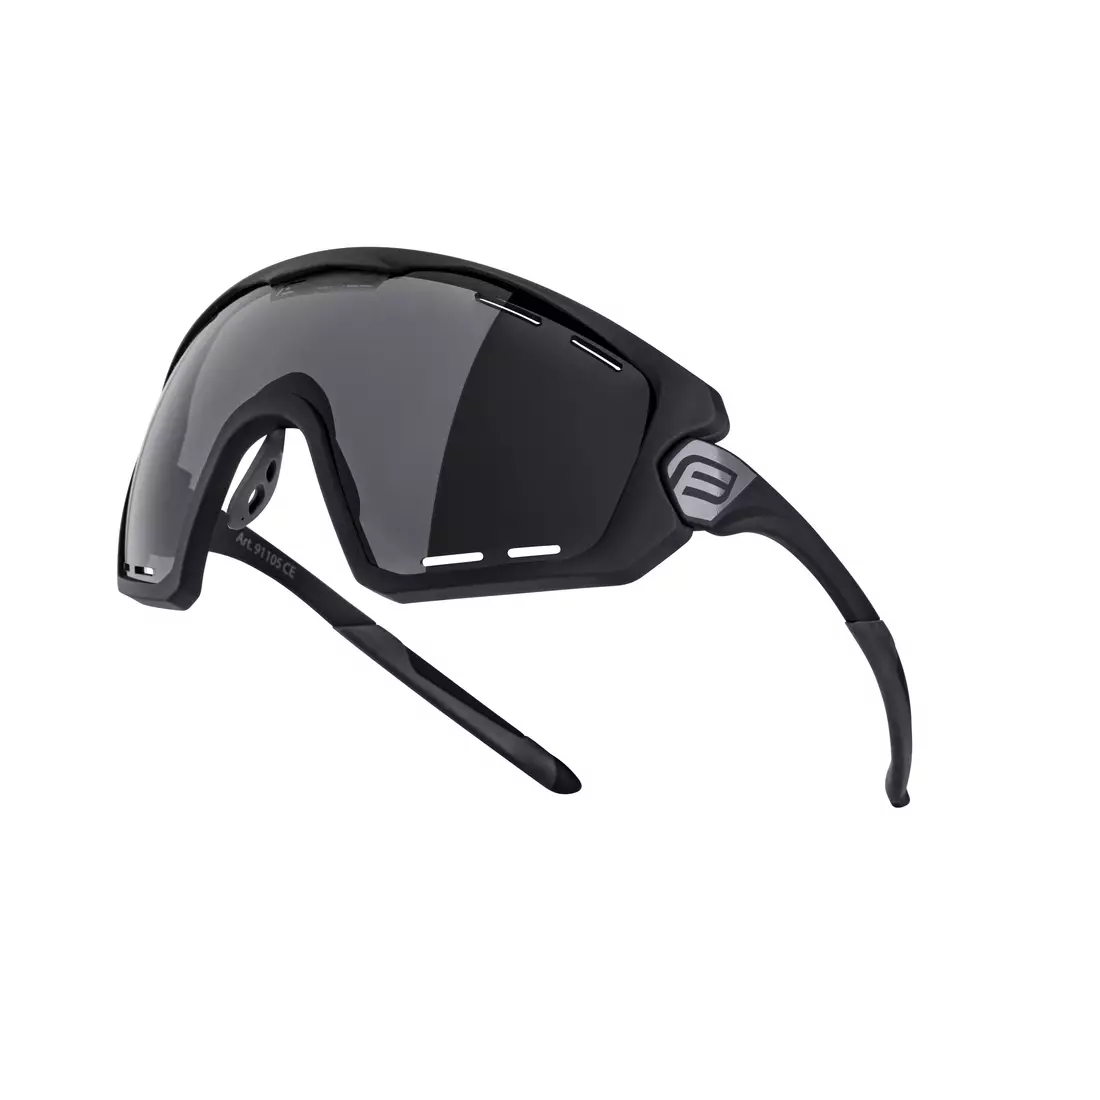 FORCE cycling / sports glasses OMBRO PLUS black mat, 91105